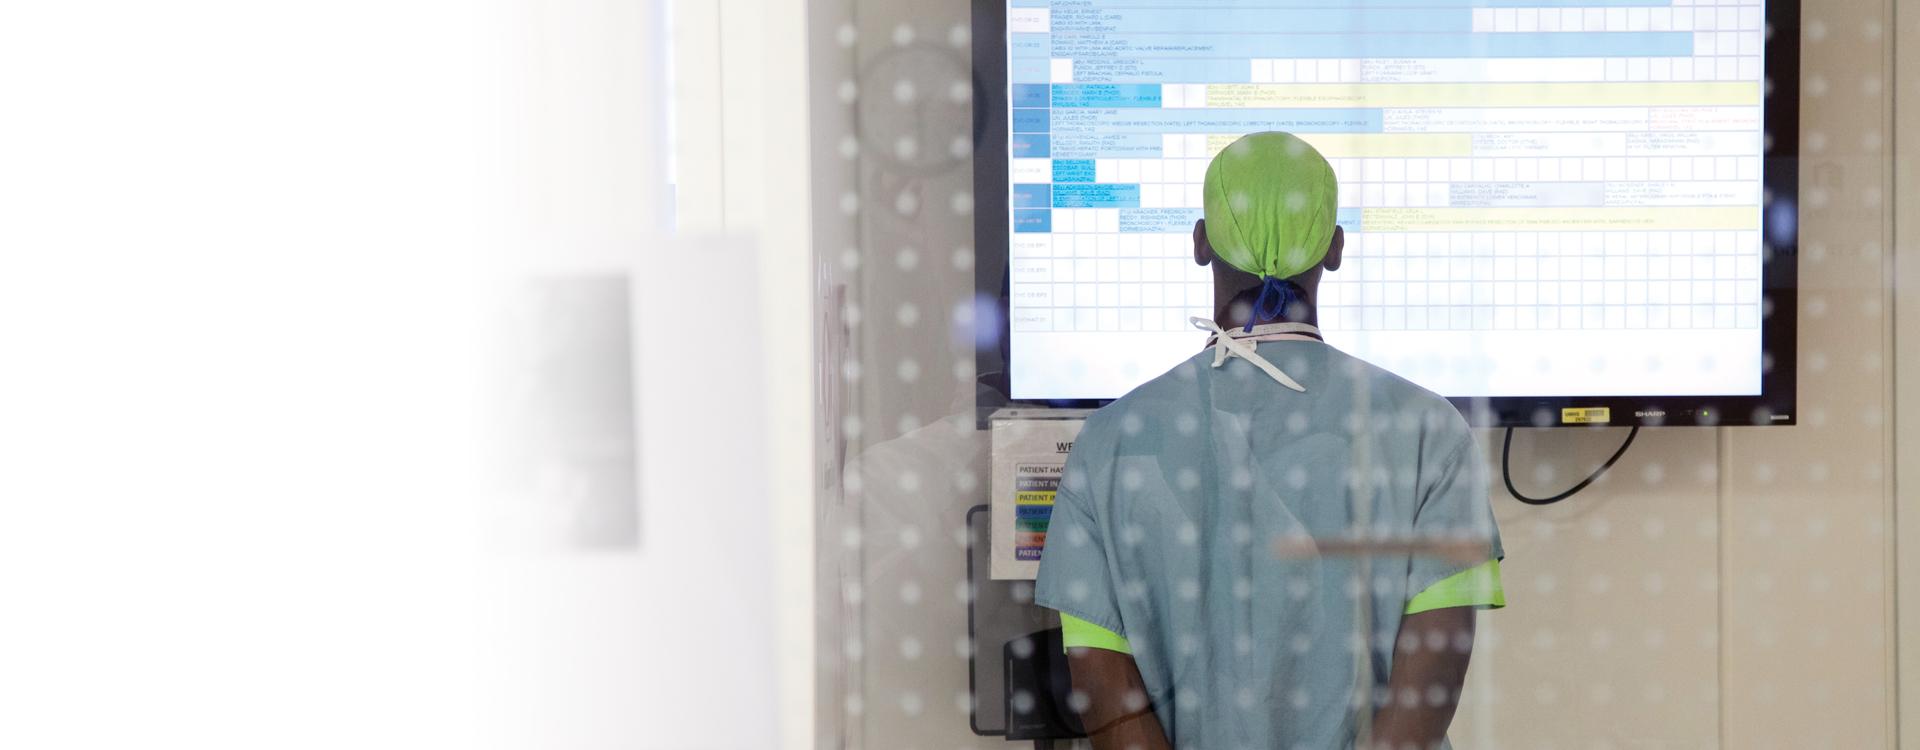 doctor in medical scrubs with their back turned looking at a wall mounted screen